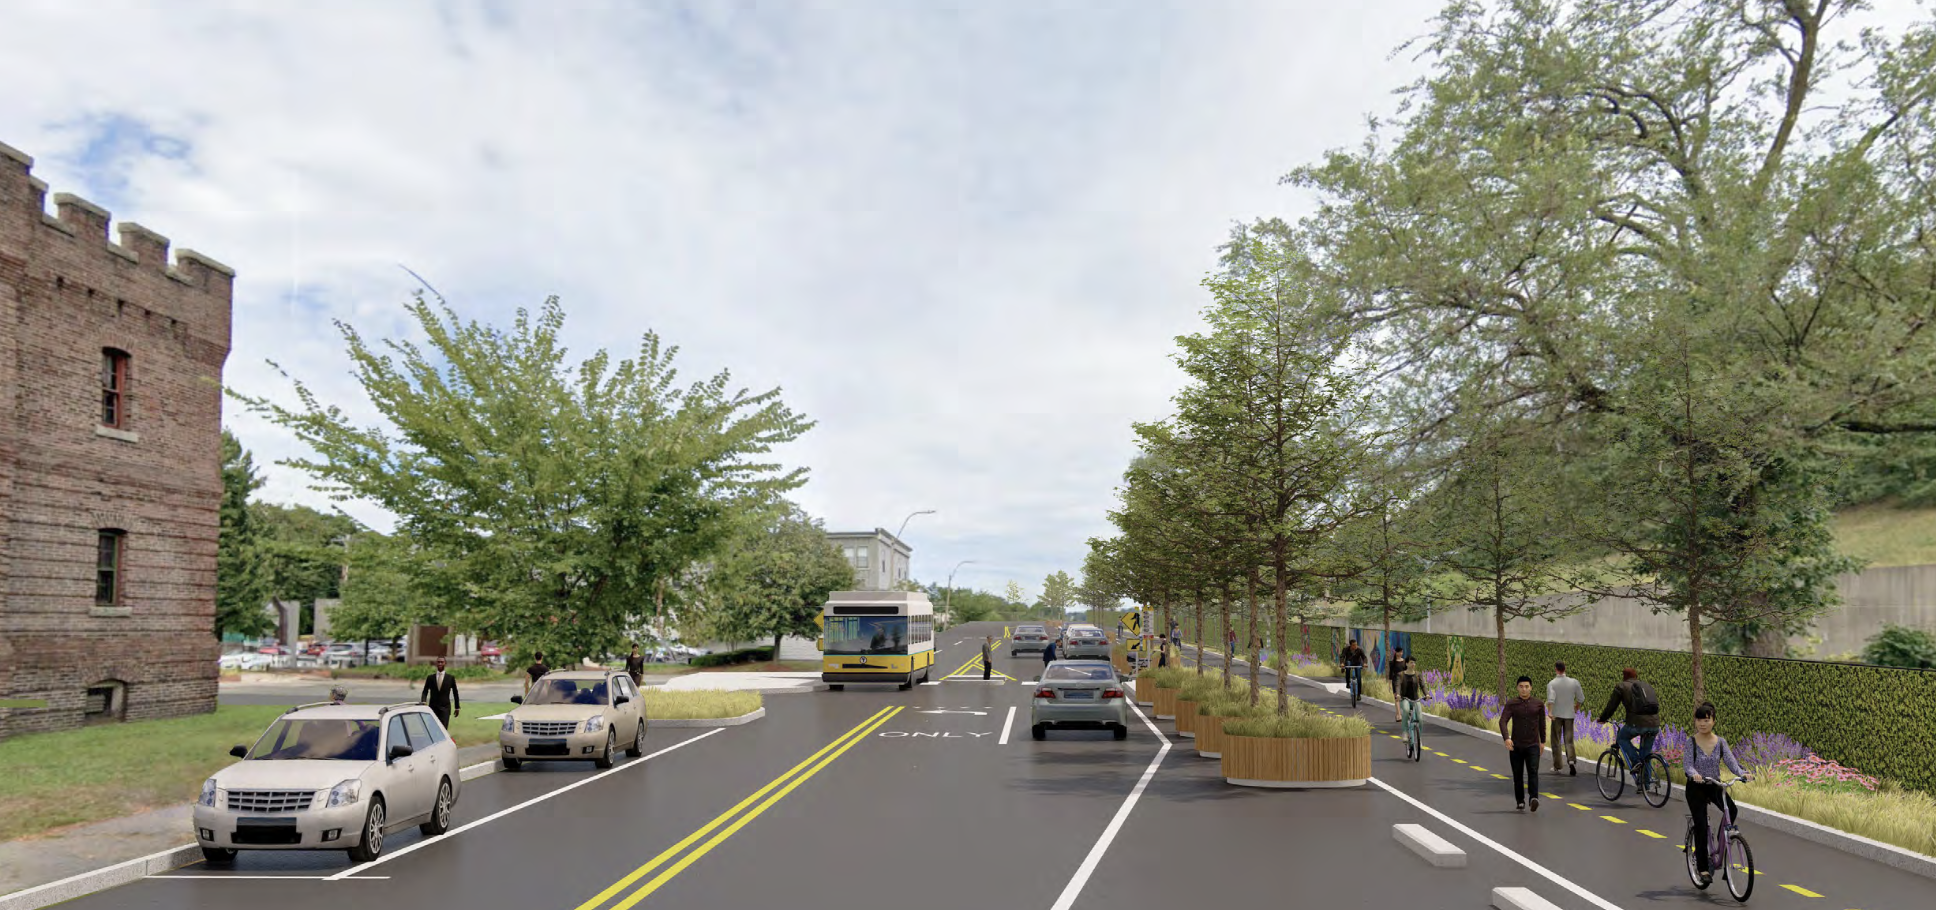 A rendering of a street with three moving vehicle lanes in the middle, a parking lane on the left curb, and a two-way bike path along the right curb. In the middle distance is a crosswalk and a white-and-yellow MBTA bus is approaching in the opposite lane.